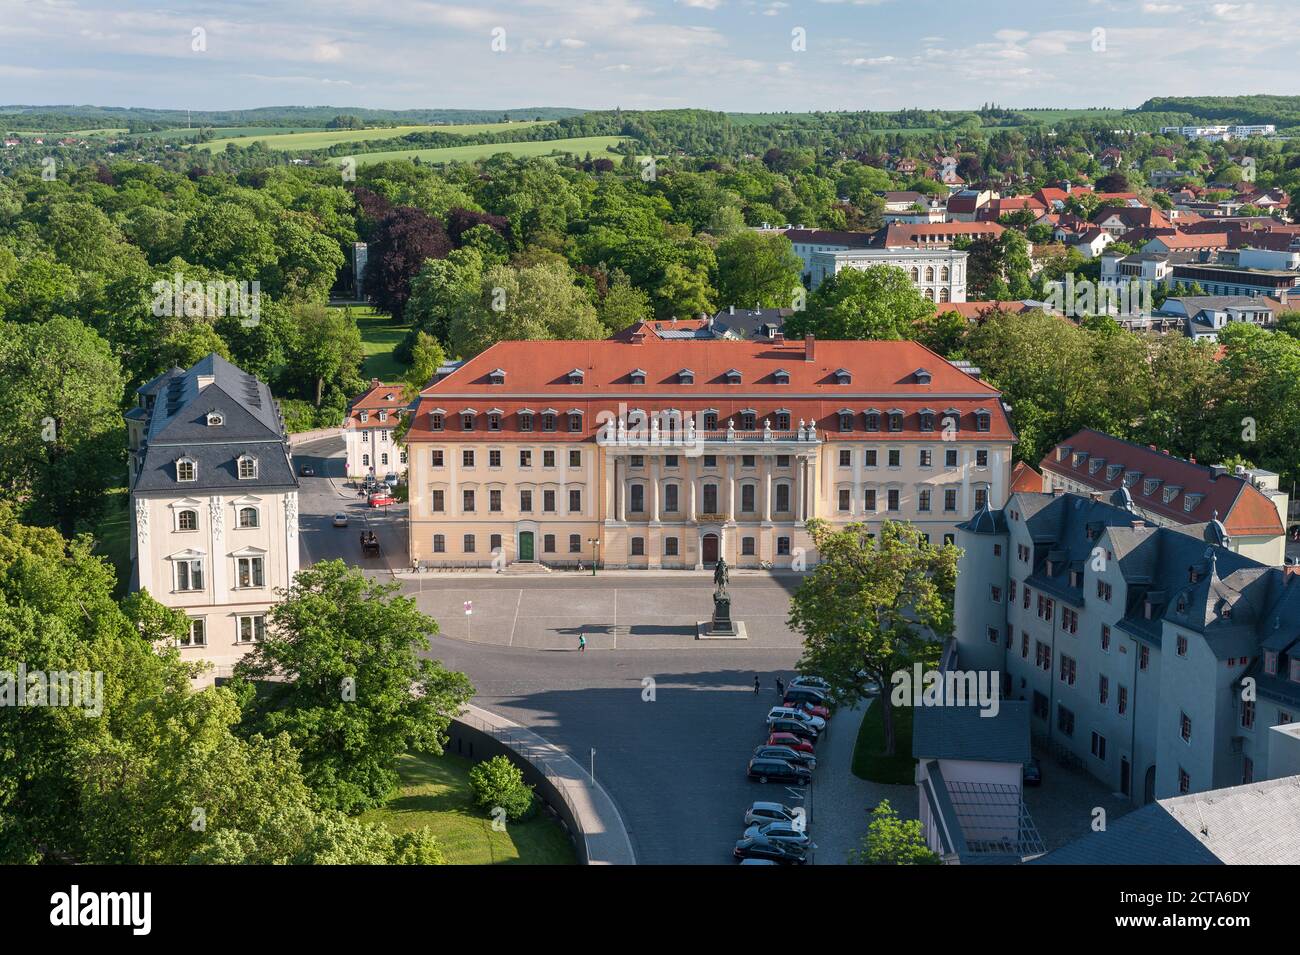 Germany, Thuringia, Weimar, Platz der Demokratie, Carl-August-Memorial and princely house, Music College Franz Liszt, left Anna Amalia Library Stock Photo